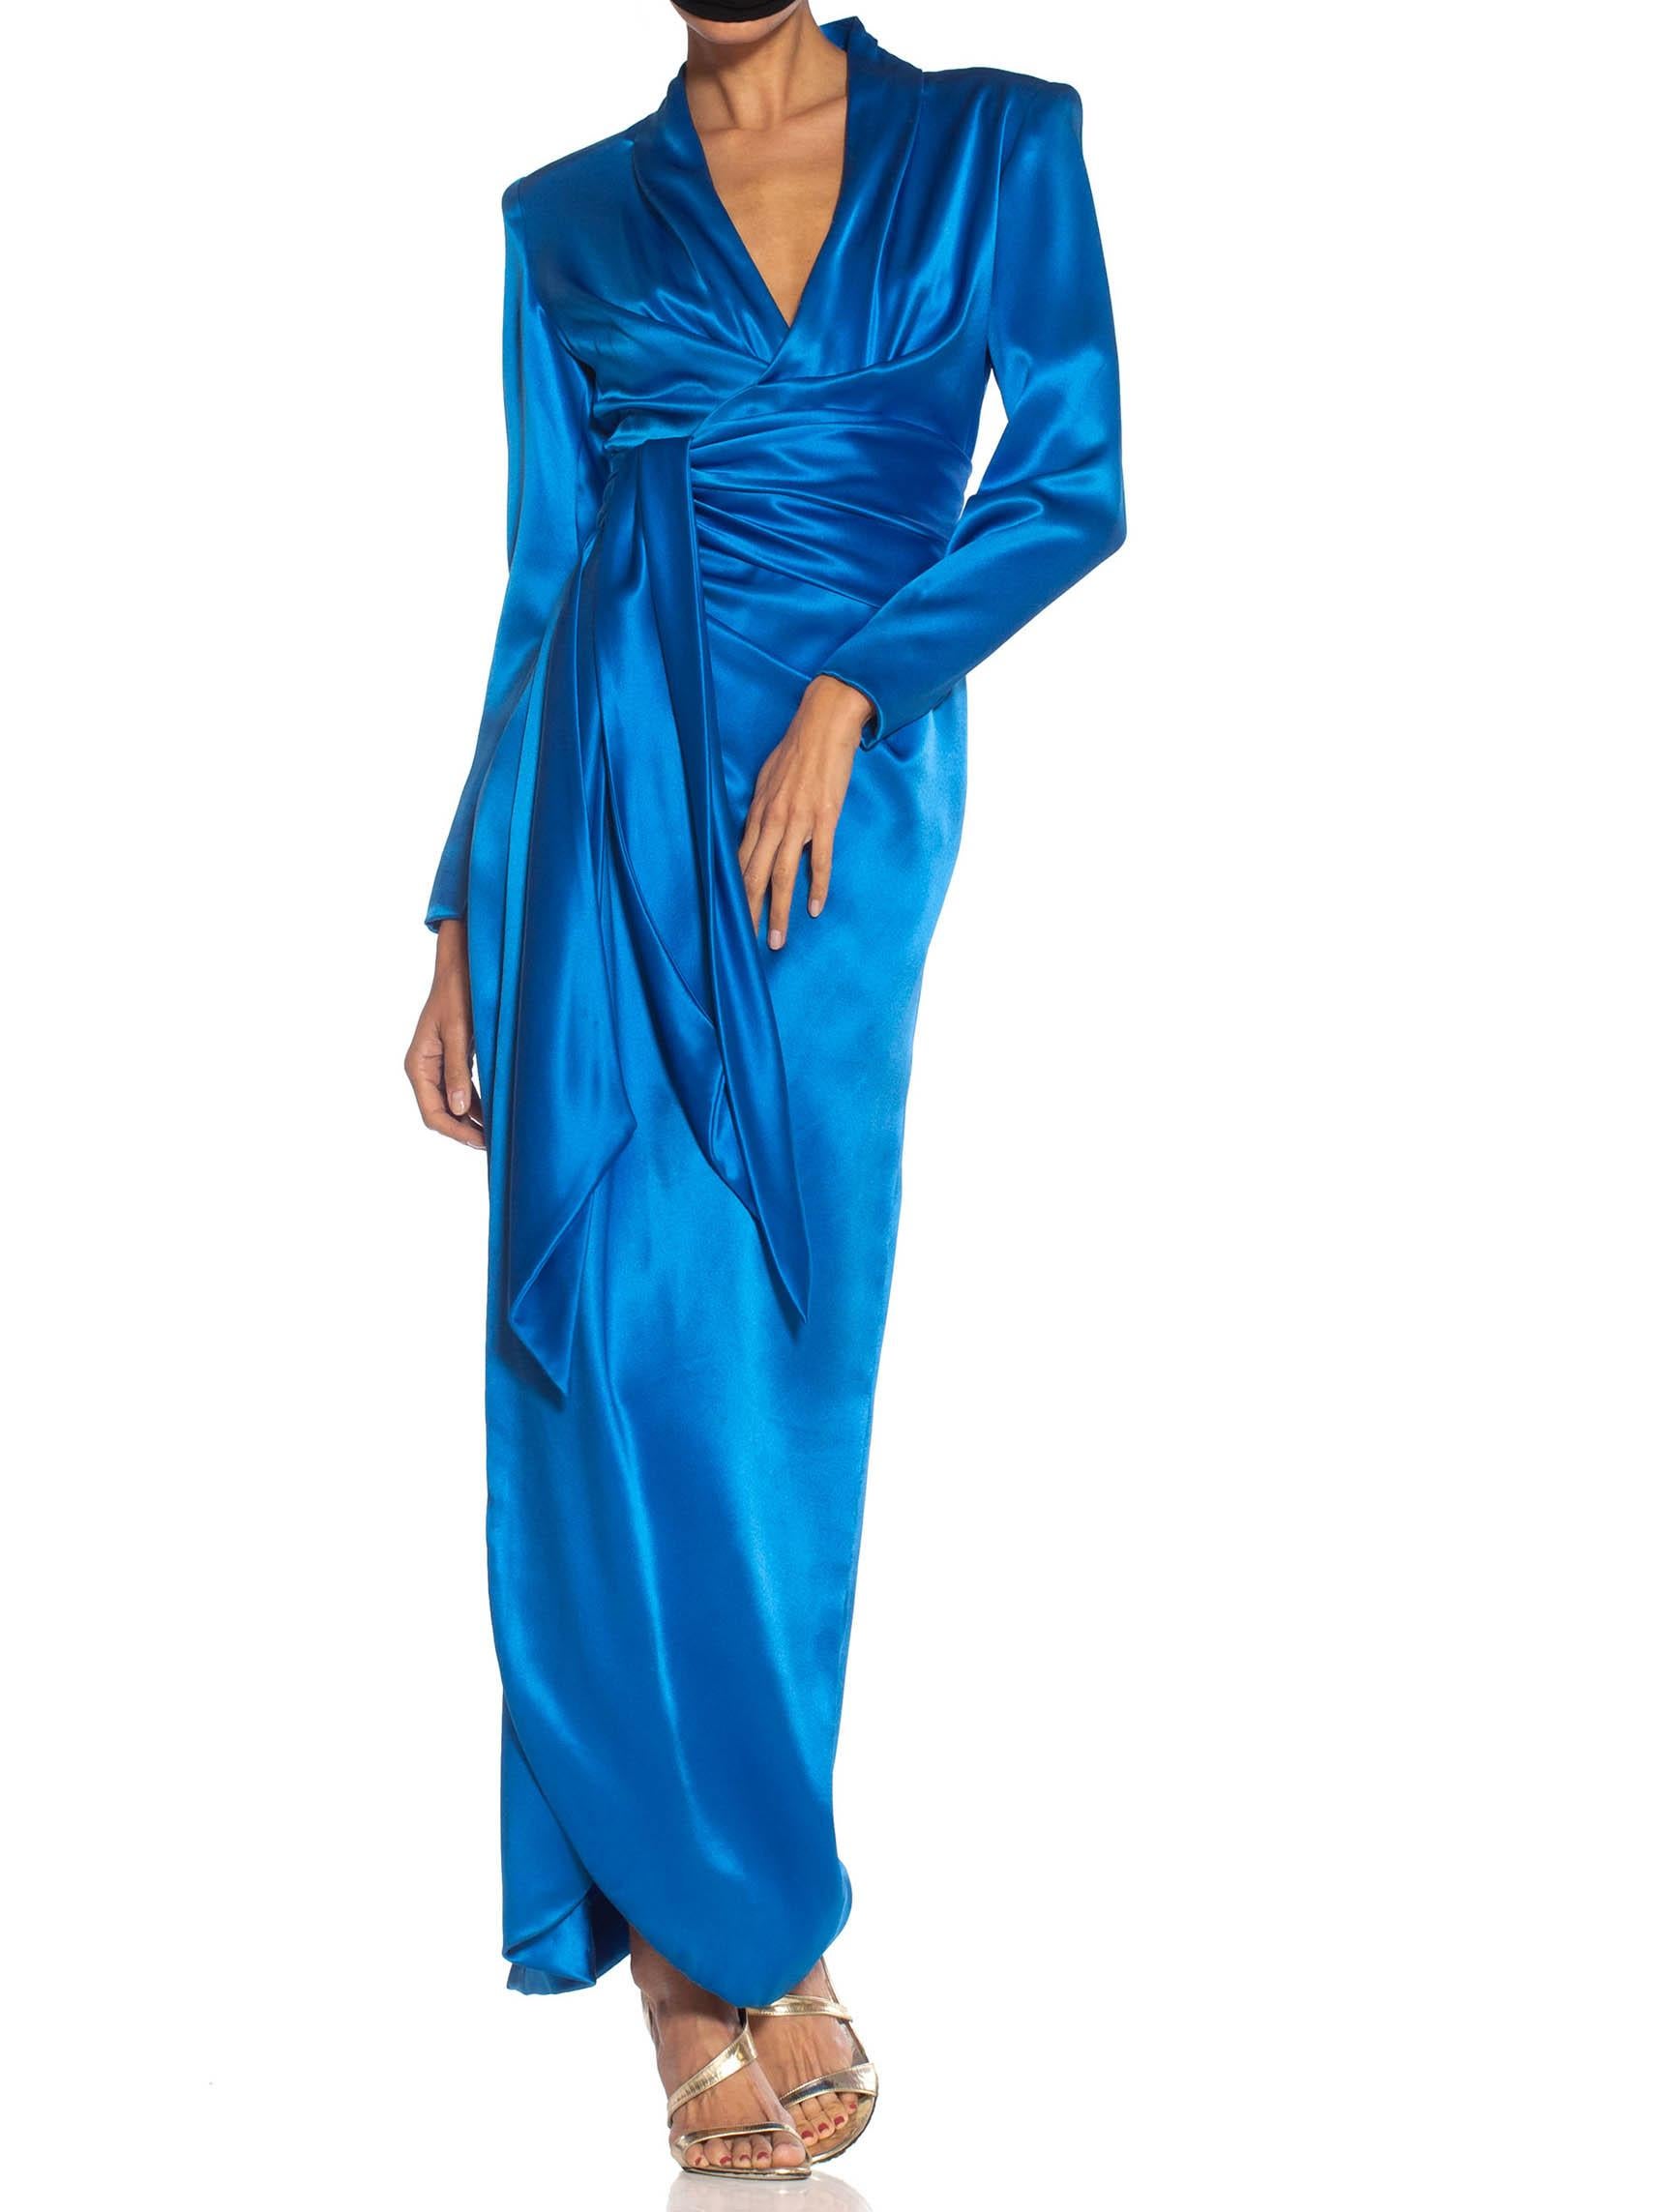 Women's 1980S GIVENCHY Electric Blue Haute Couture Silk Double Faced Satin Sleeved Gown For Sale